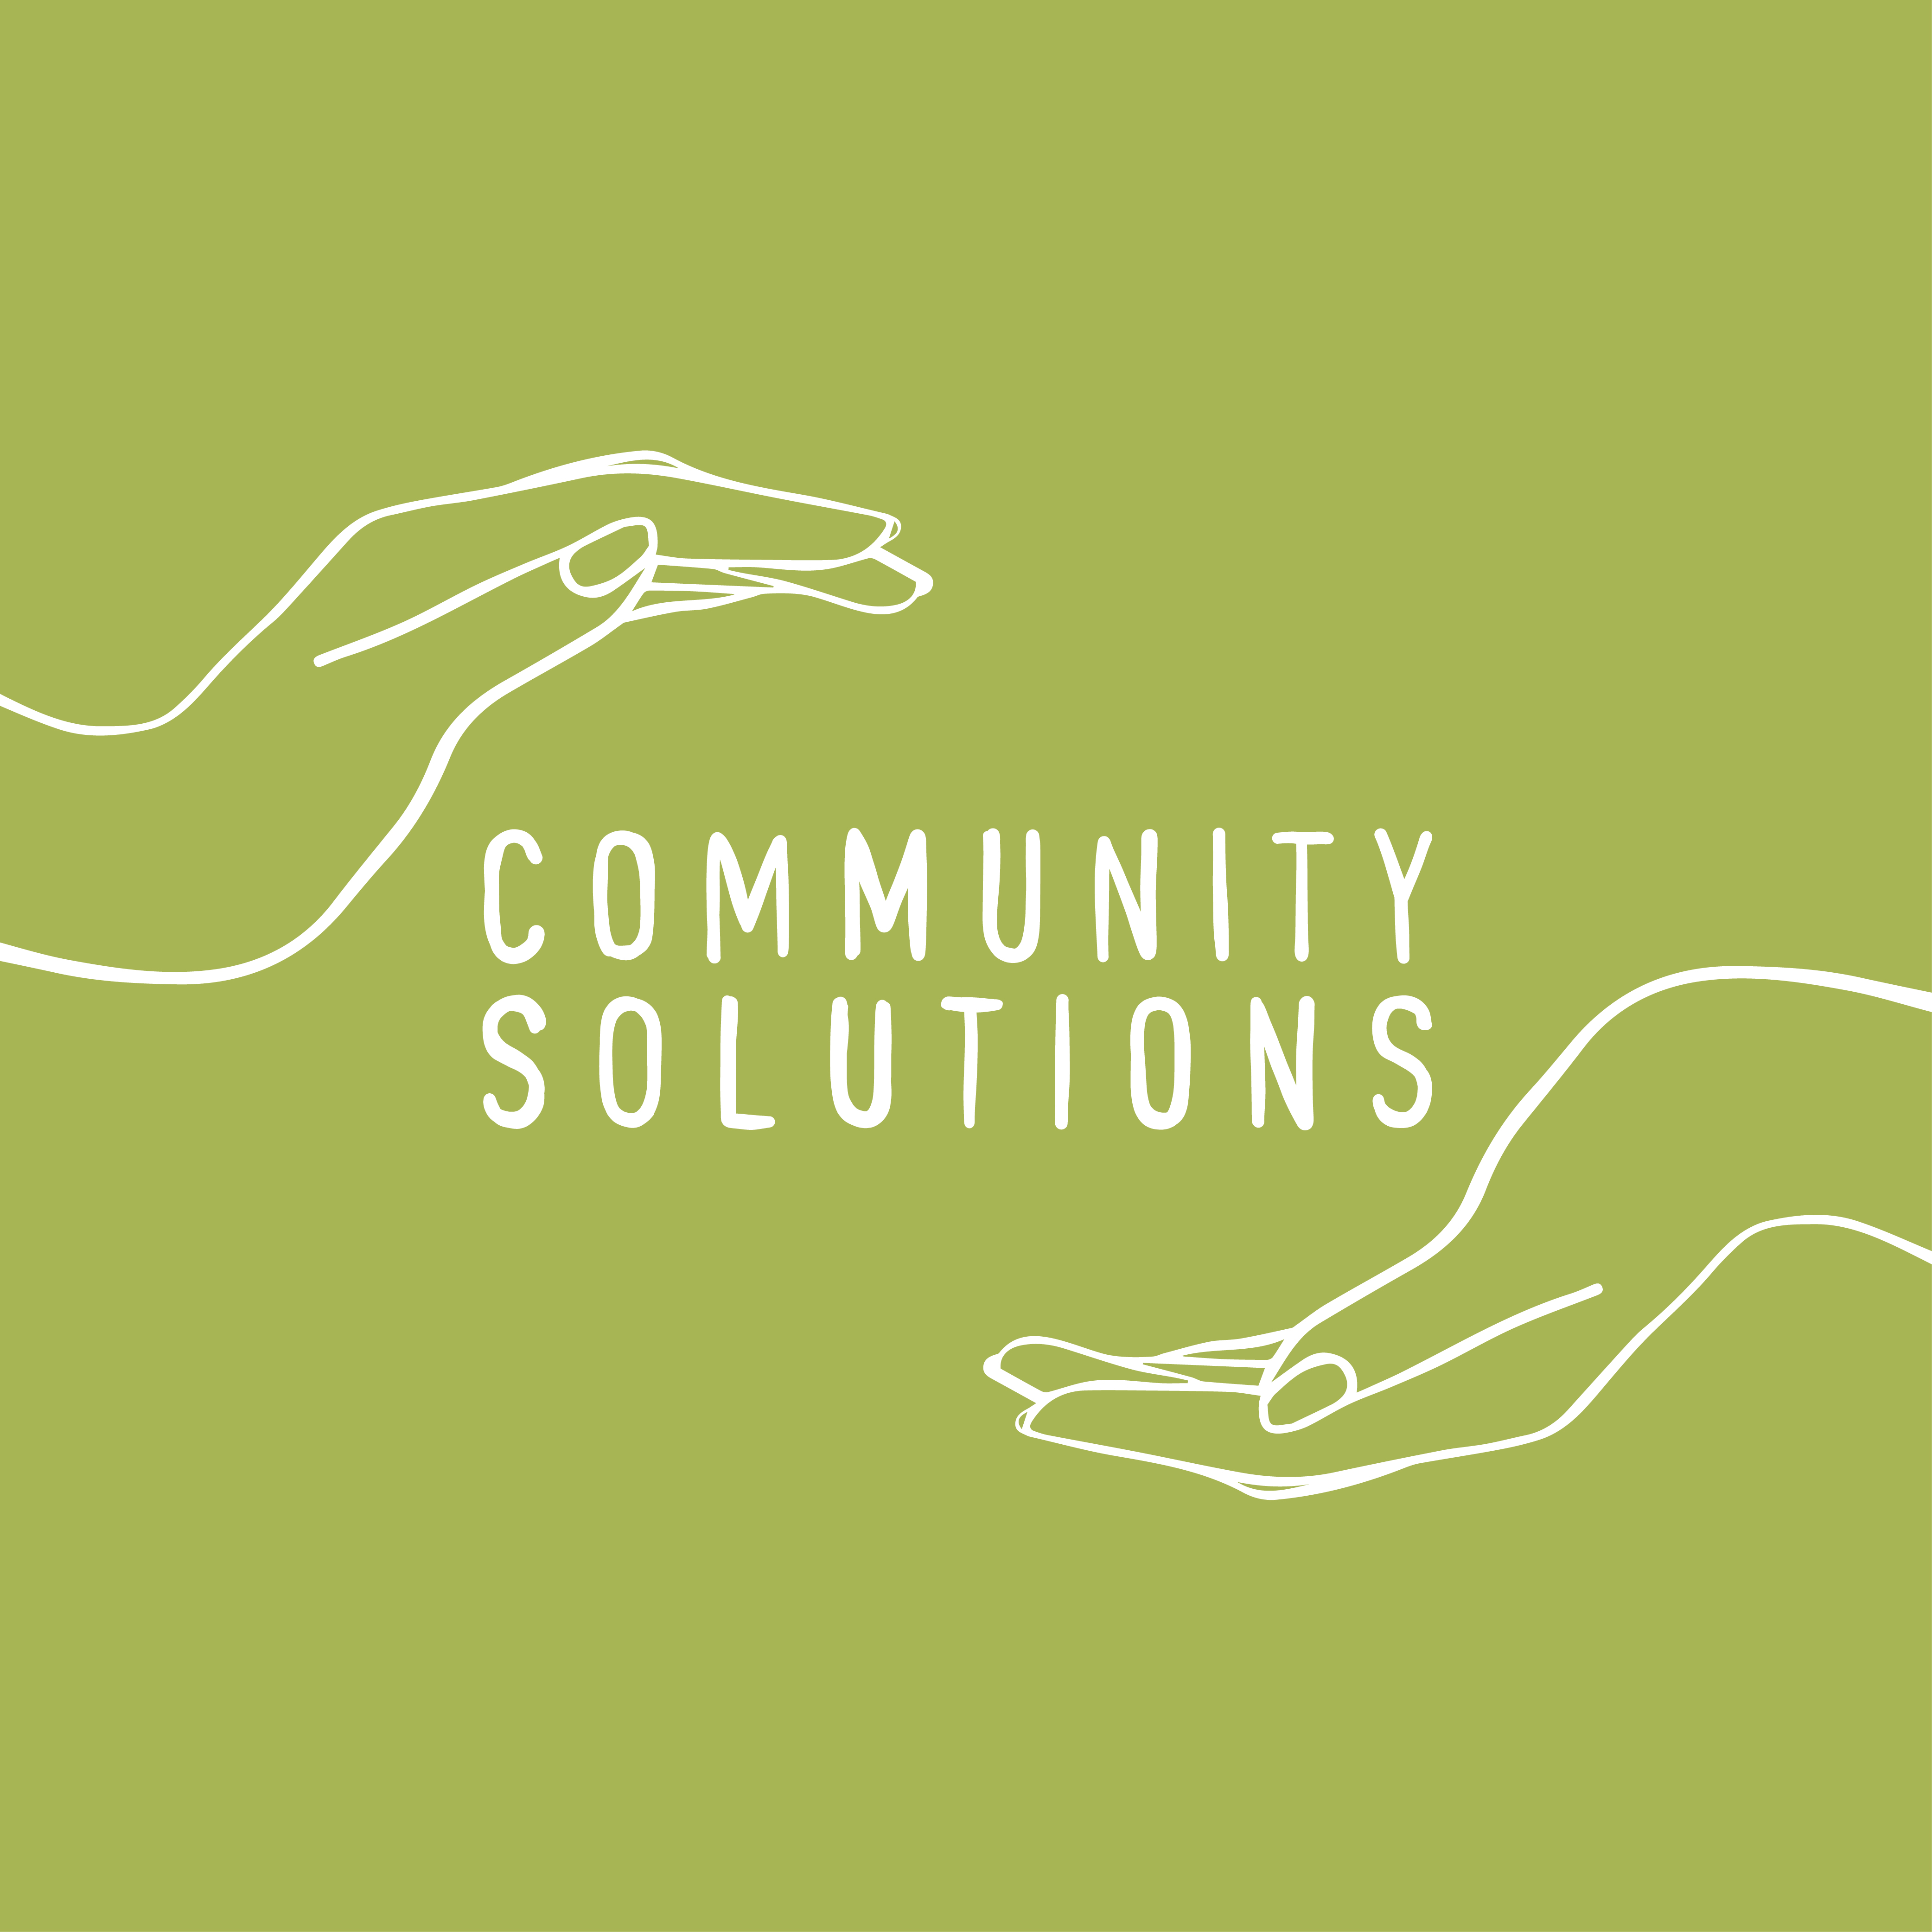 Episode 18: How to Change Community Conversations in 6 Steps